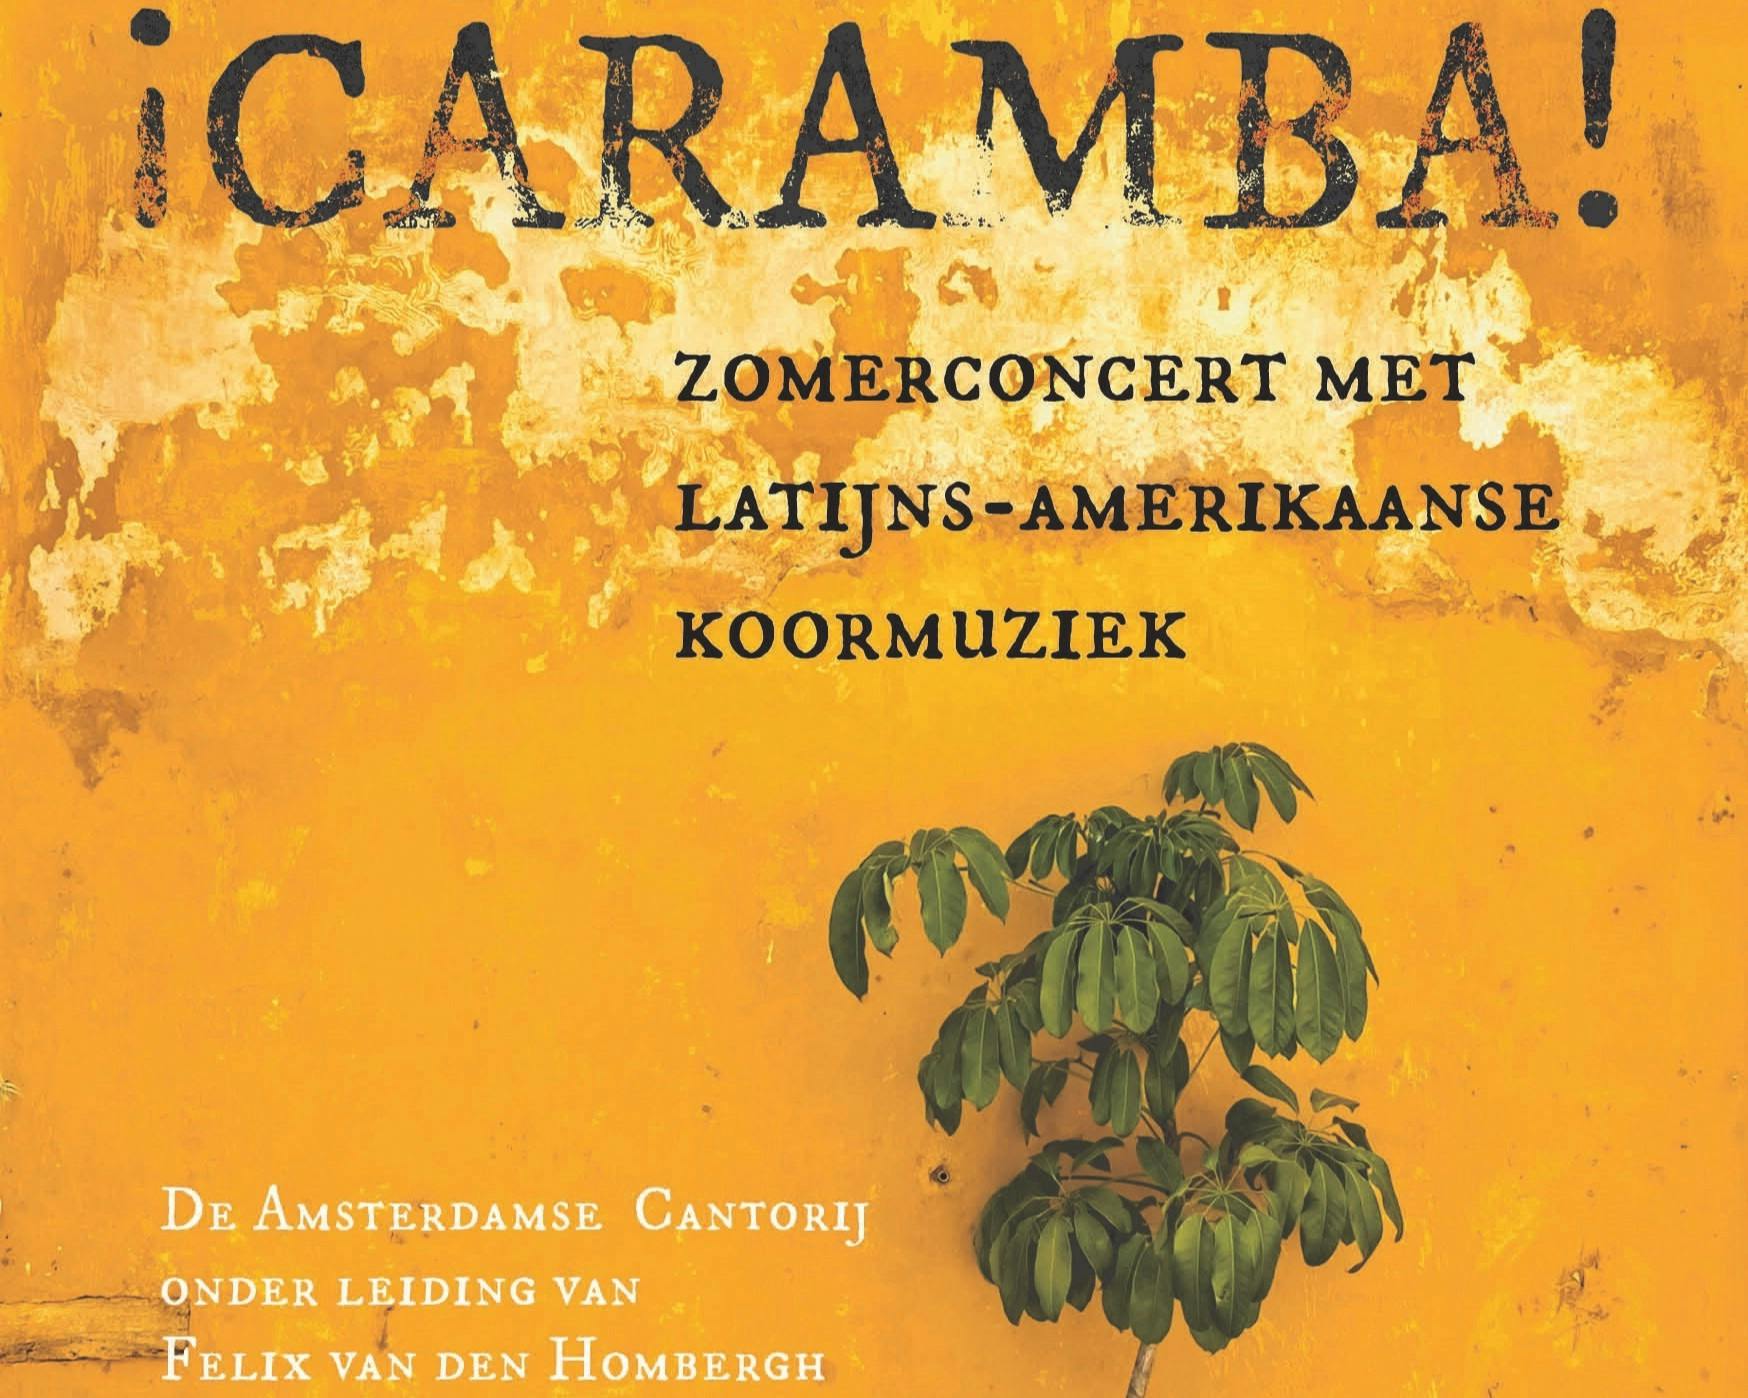 Amsterdam Cantorij will bring South American sounds on the Amstelveld.